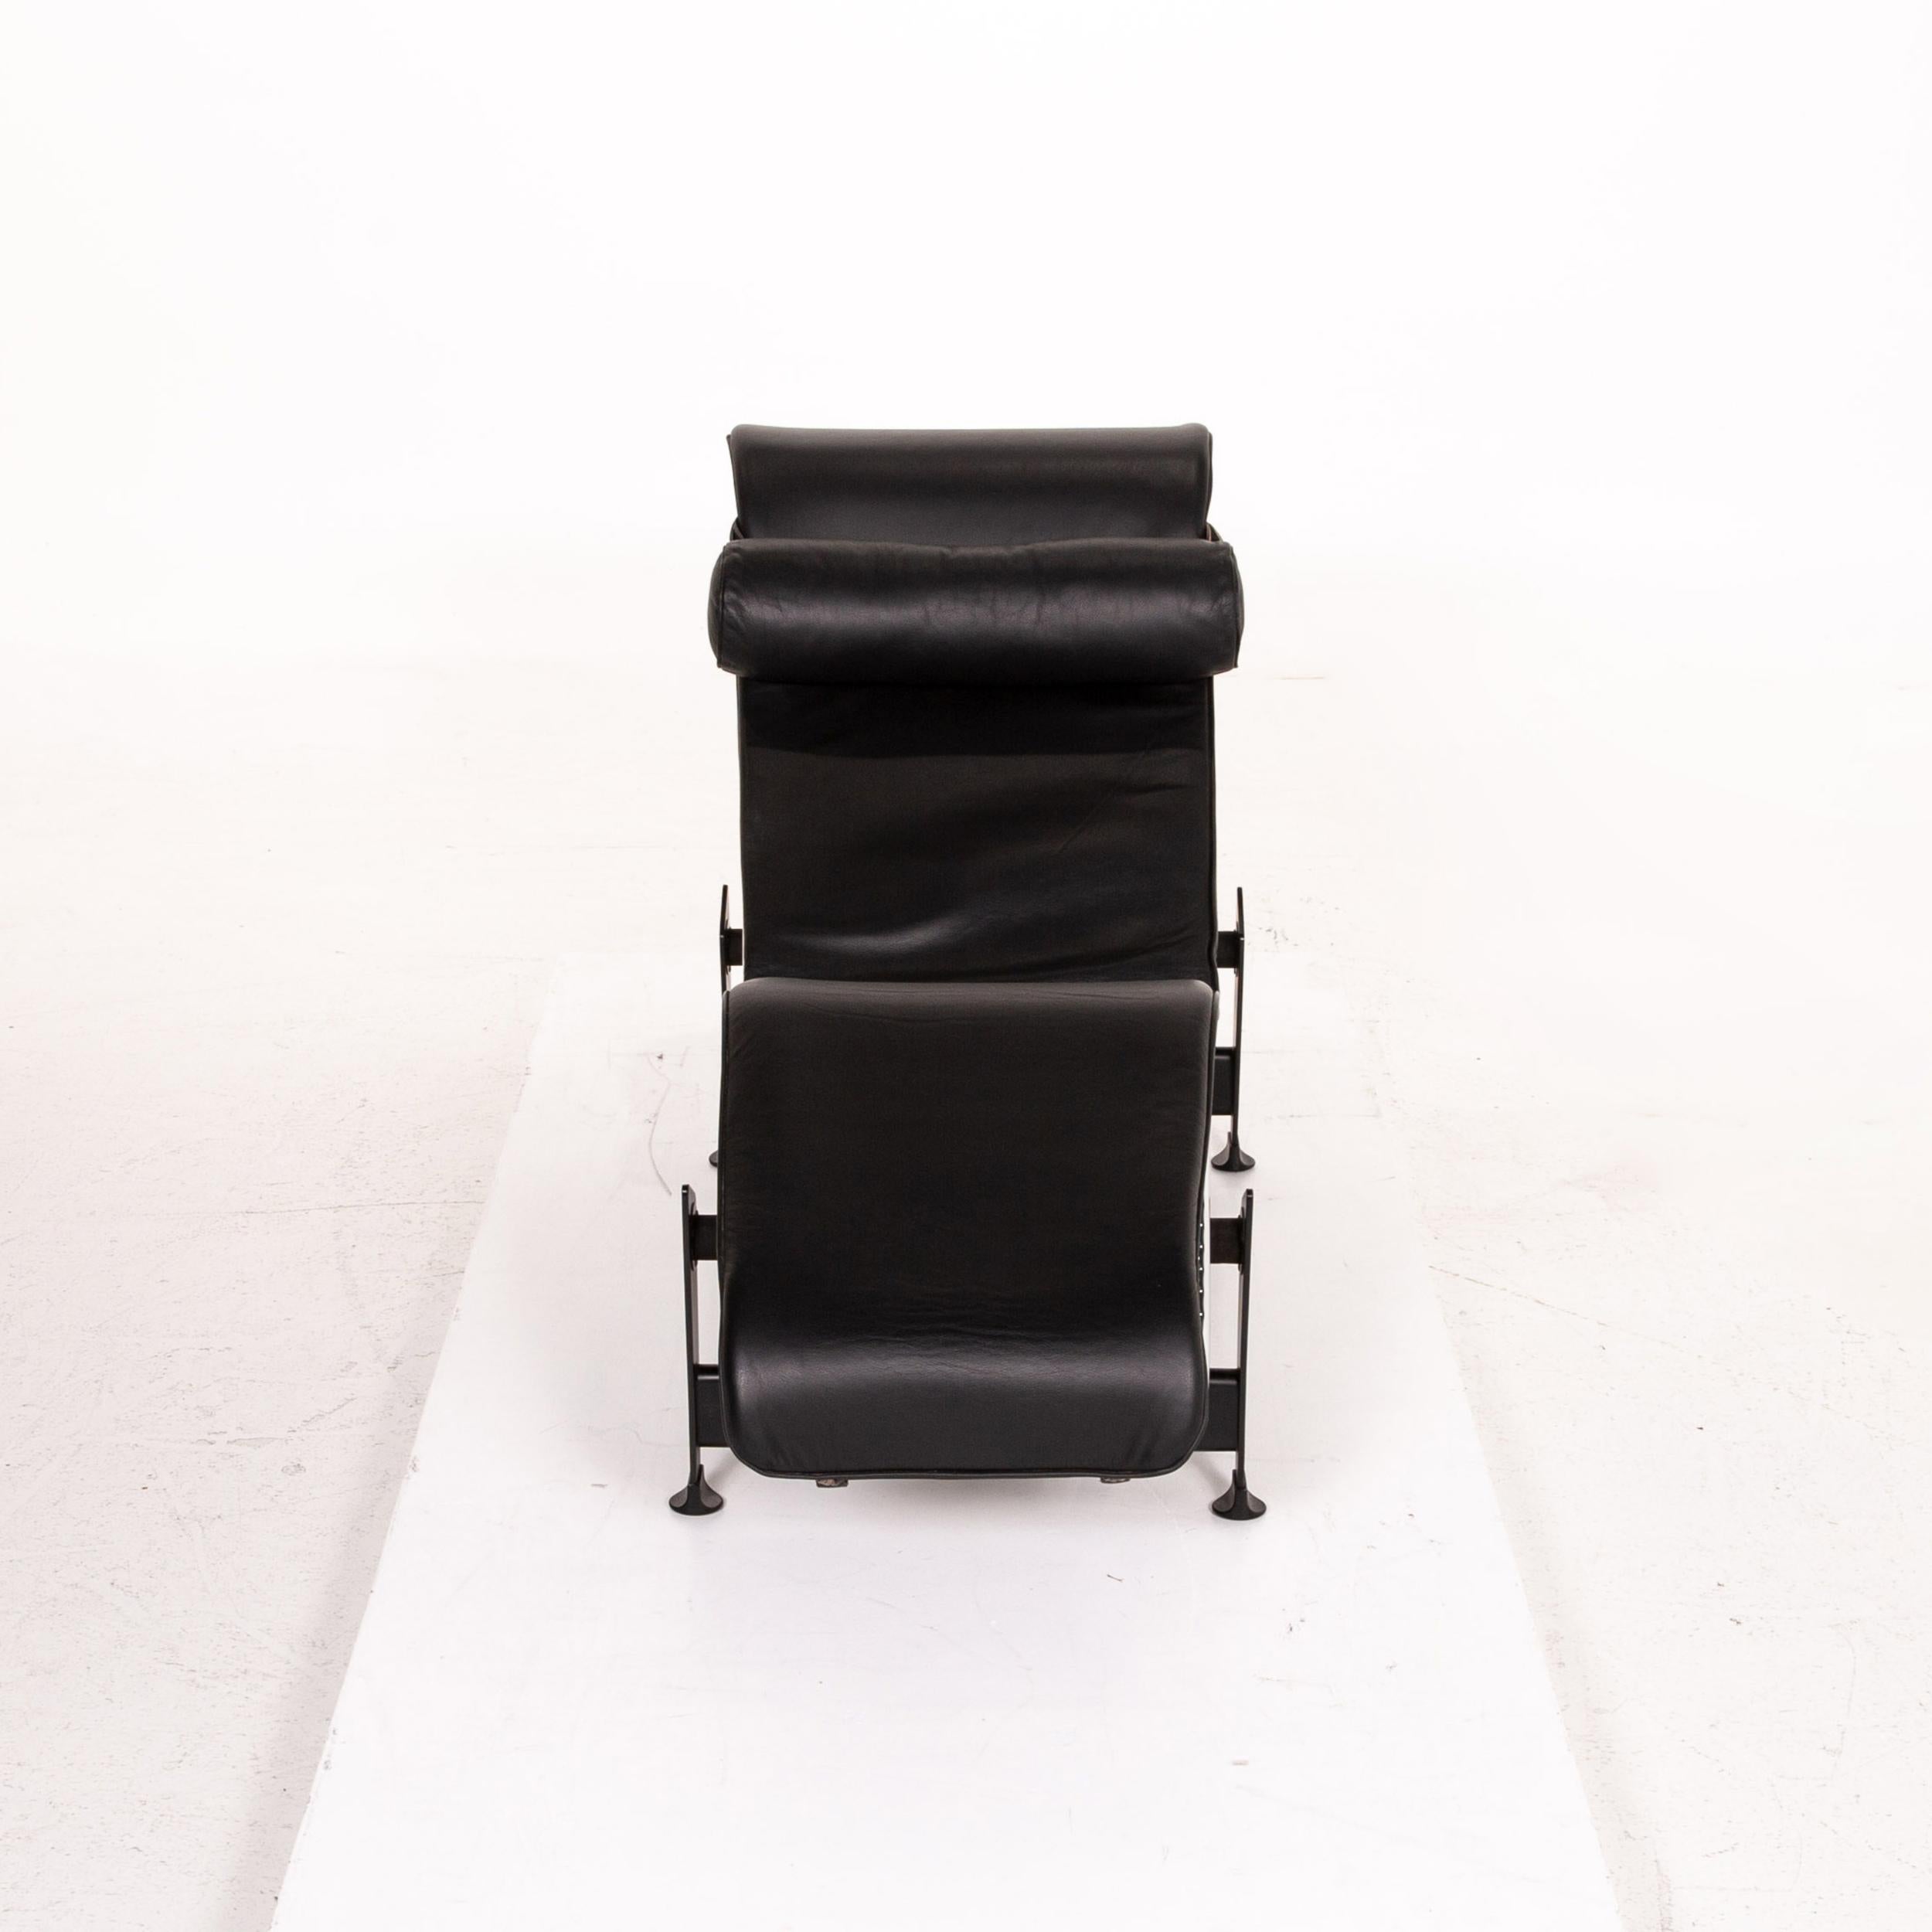 Cassina Le Corbusier LC 4 Leather Lounger Black Function Relaxation Function For Sale 3